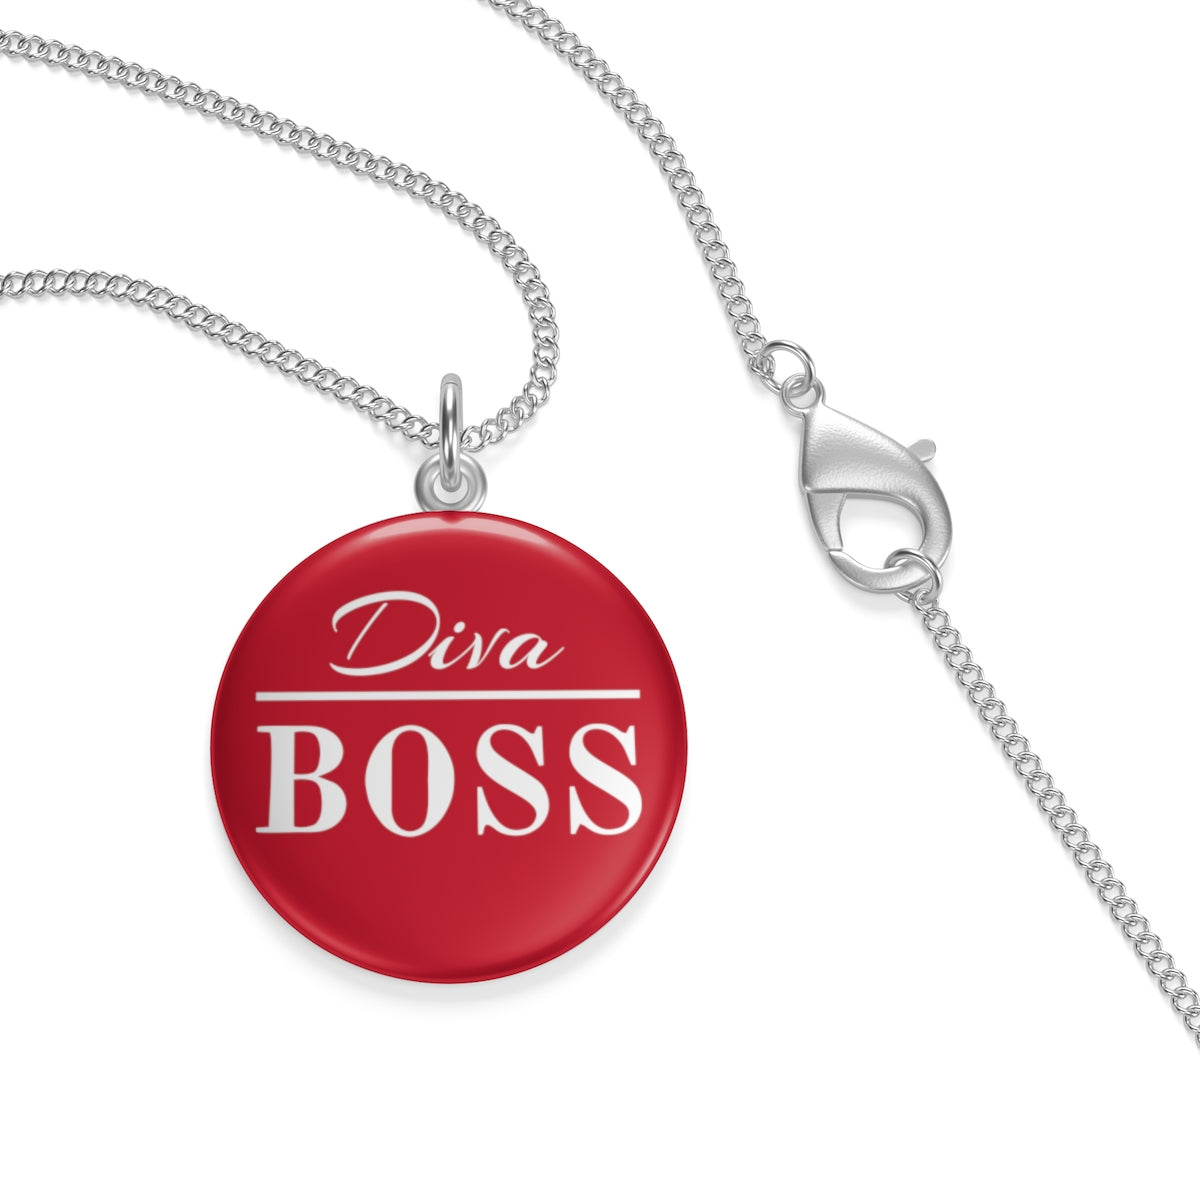 Diva Boss Necklace – The Fly